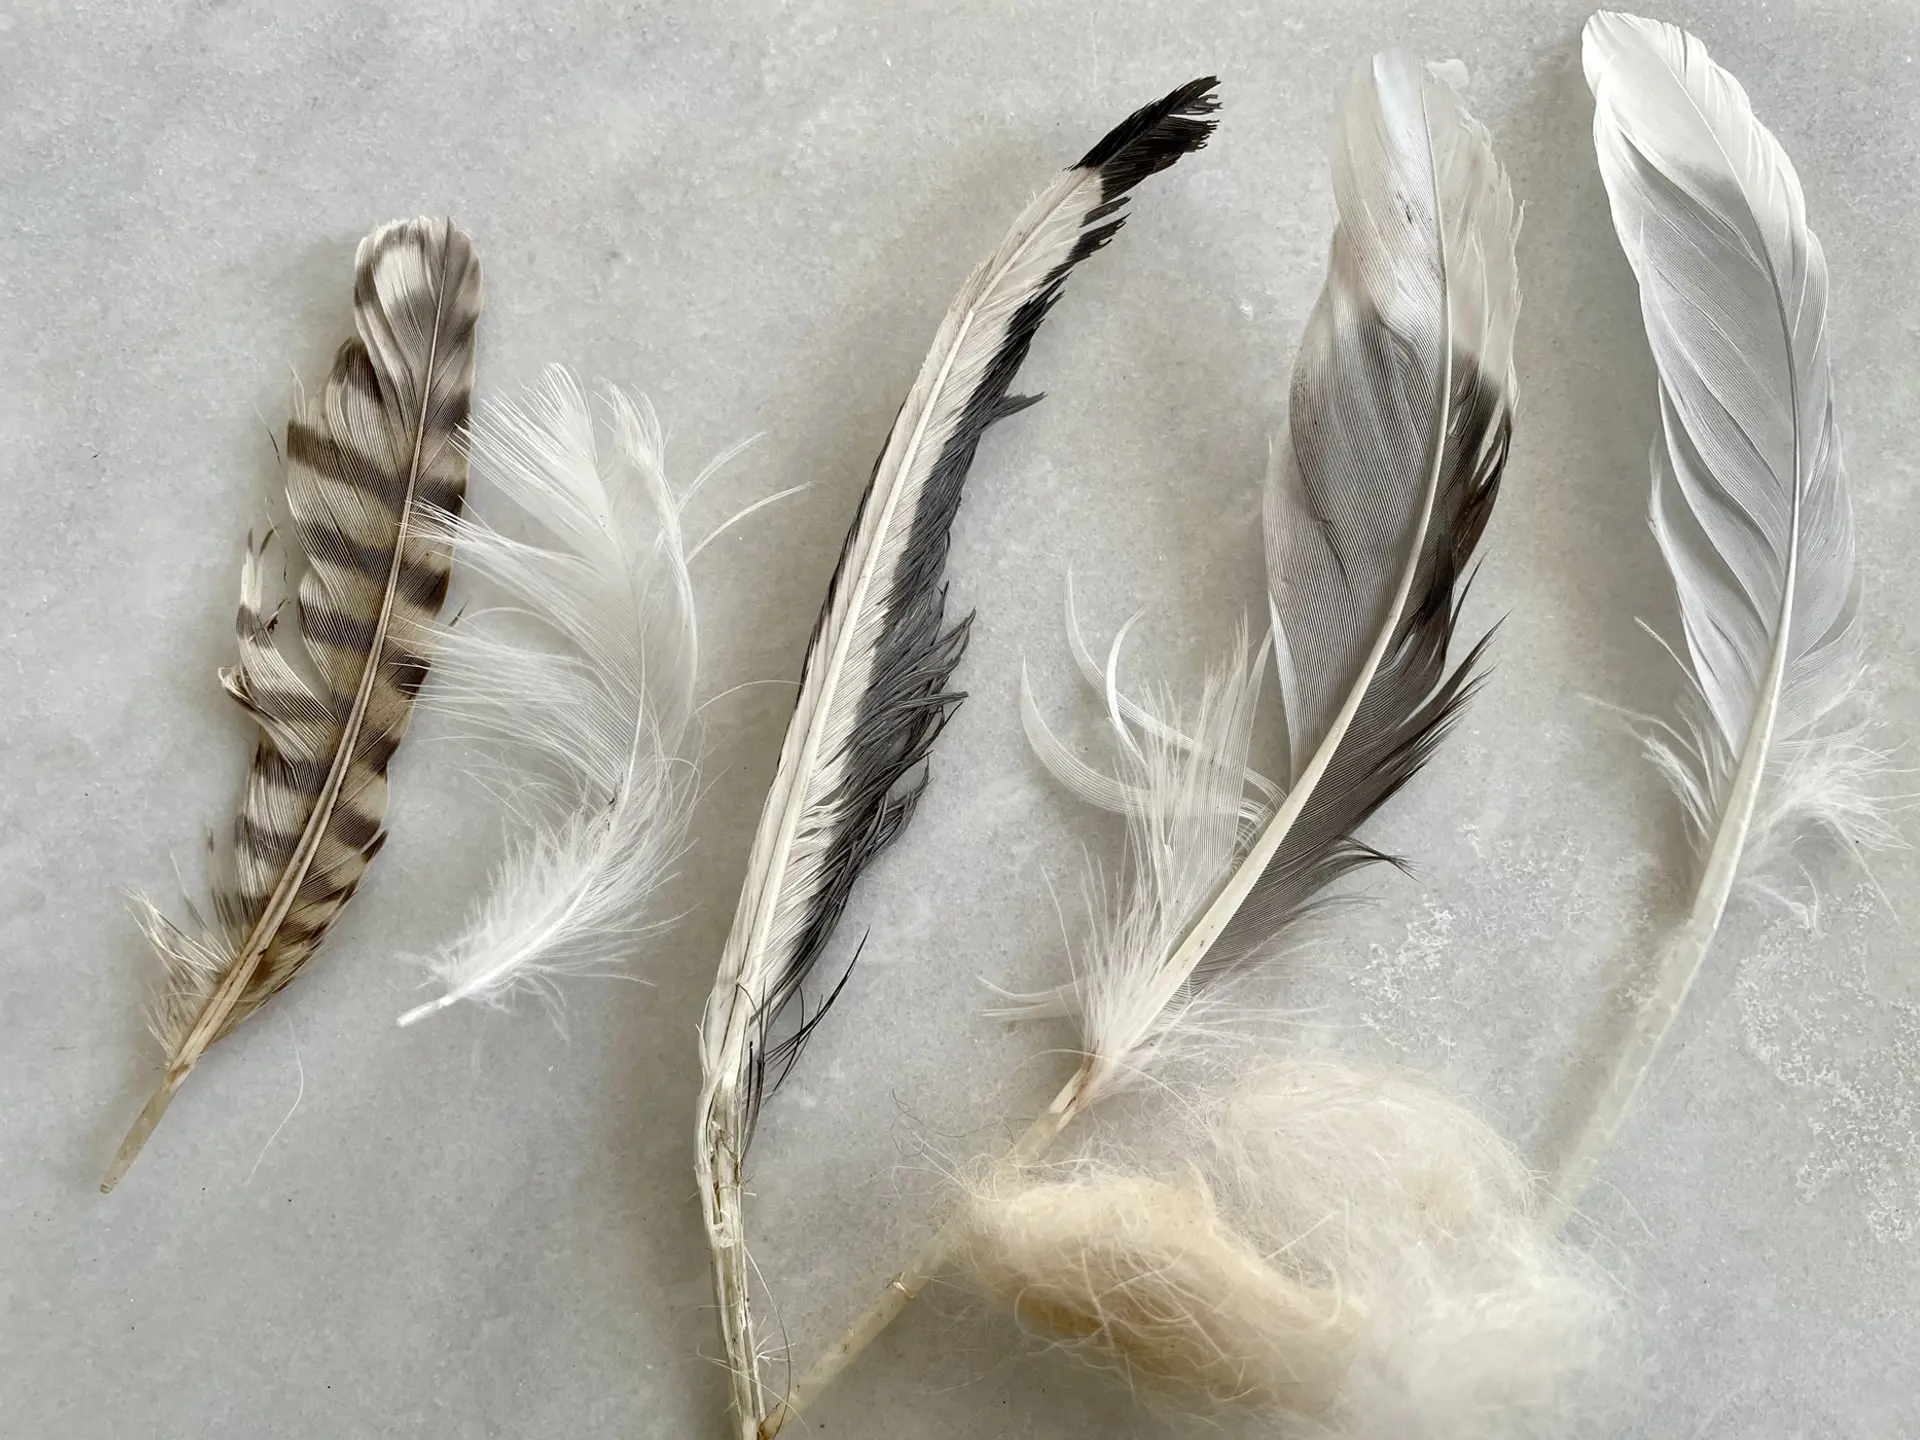 A collection of white and grey feathers displayed in a row on a white background.